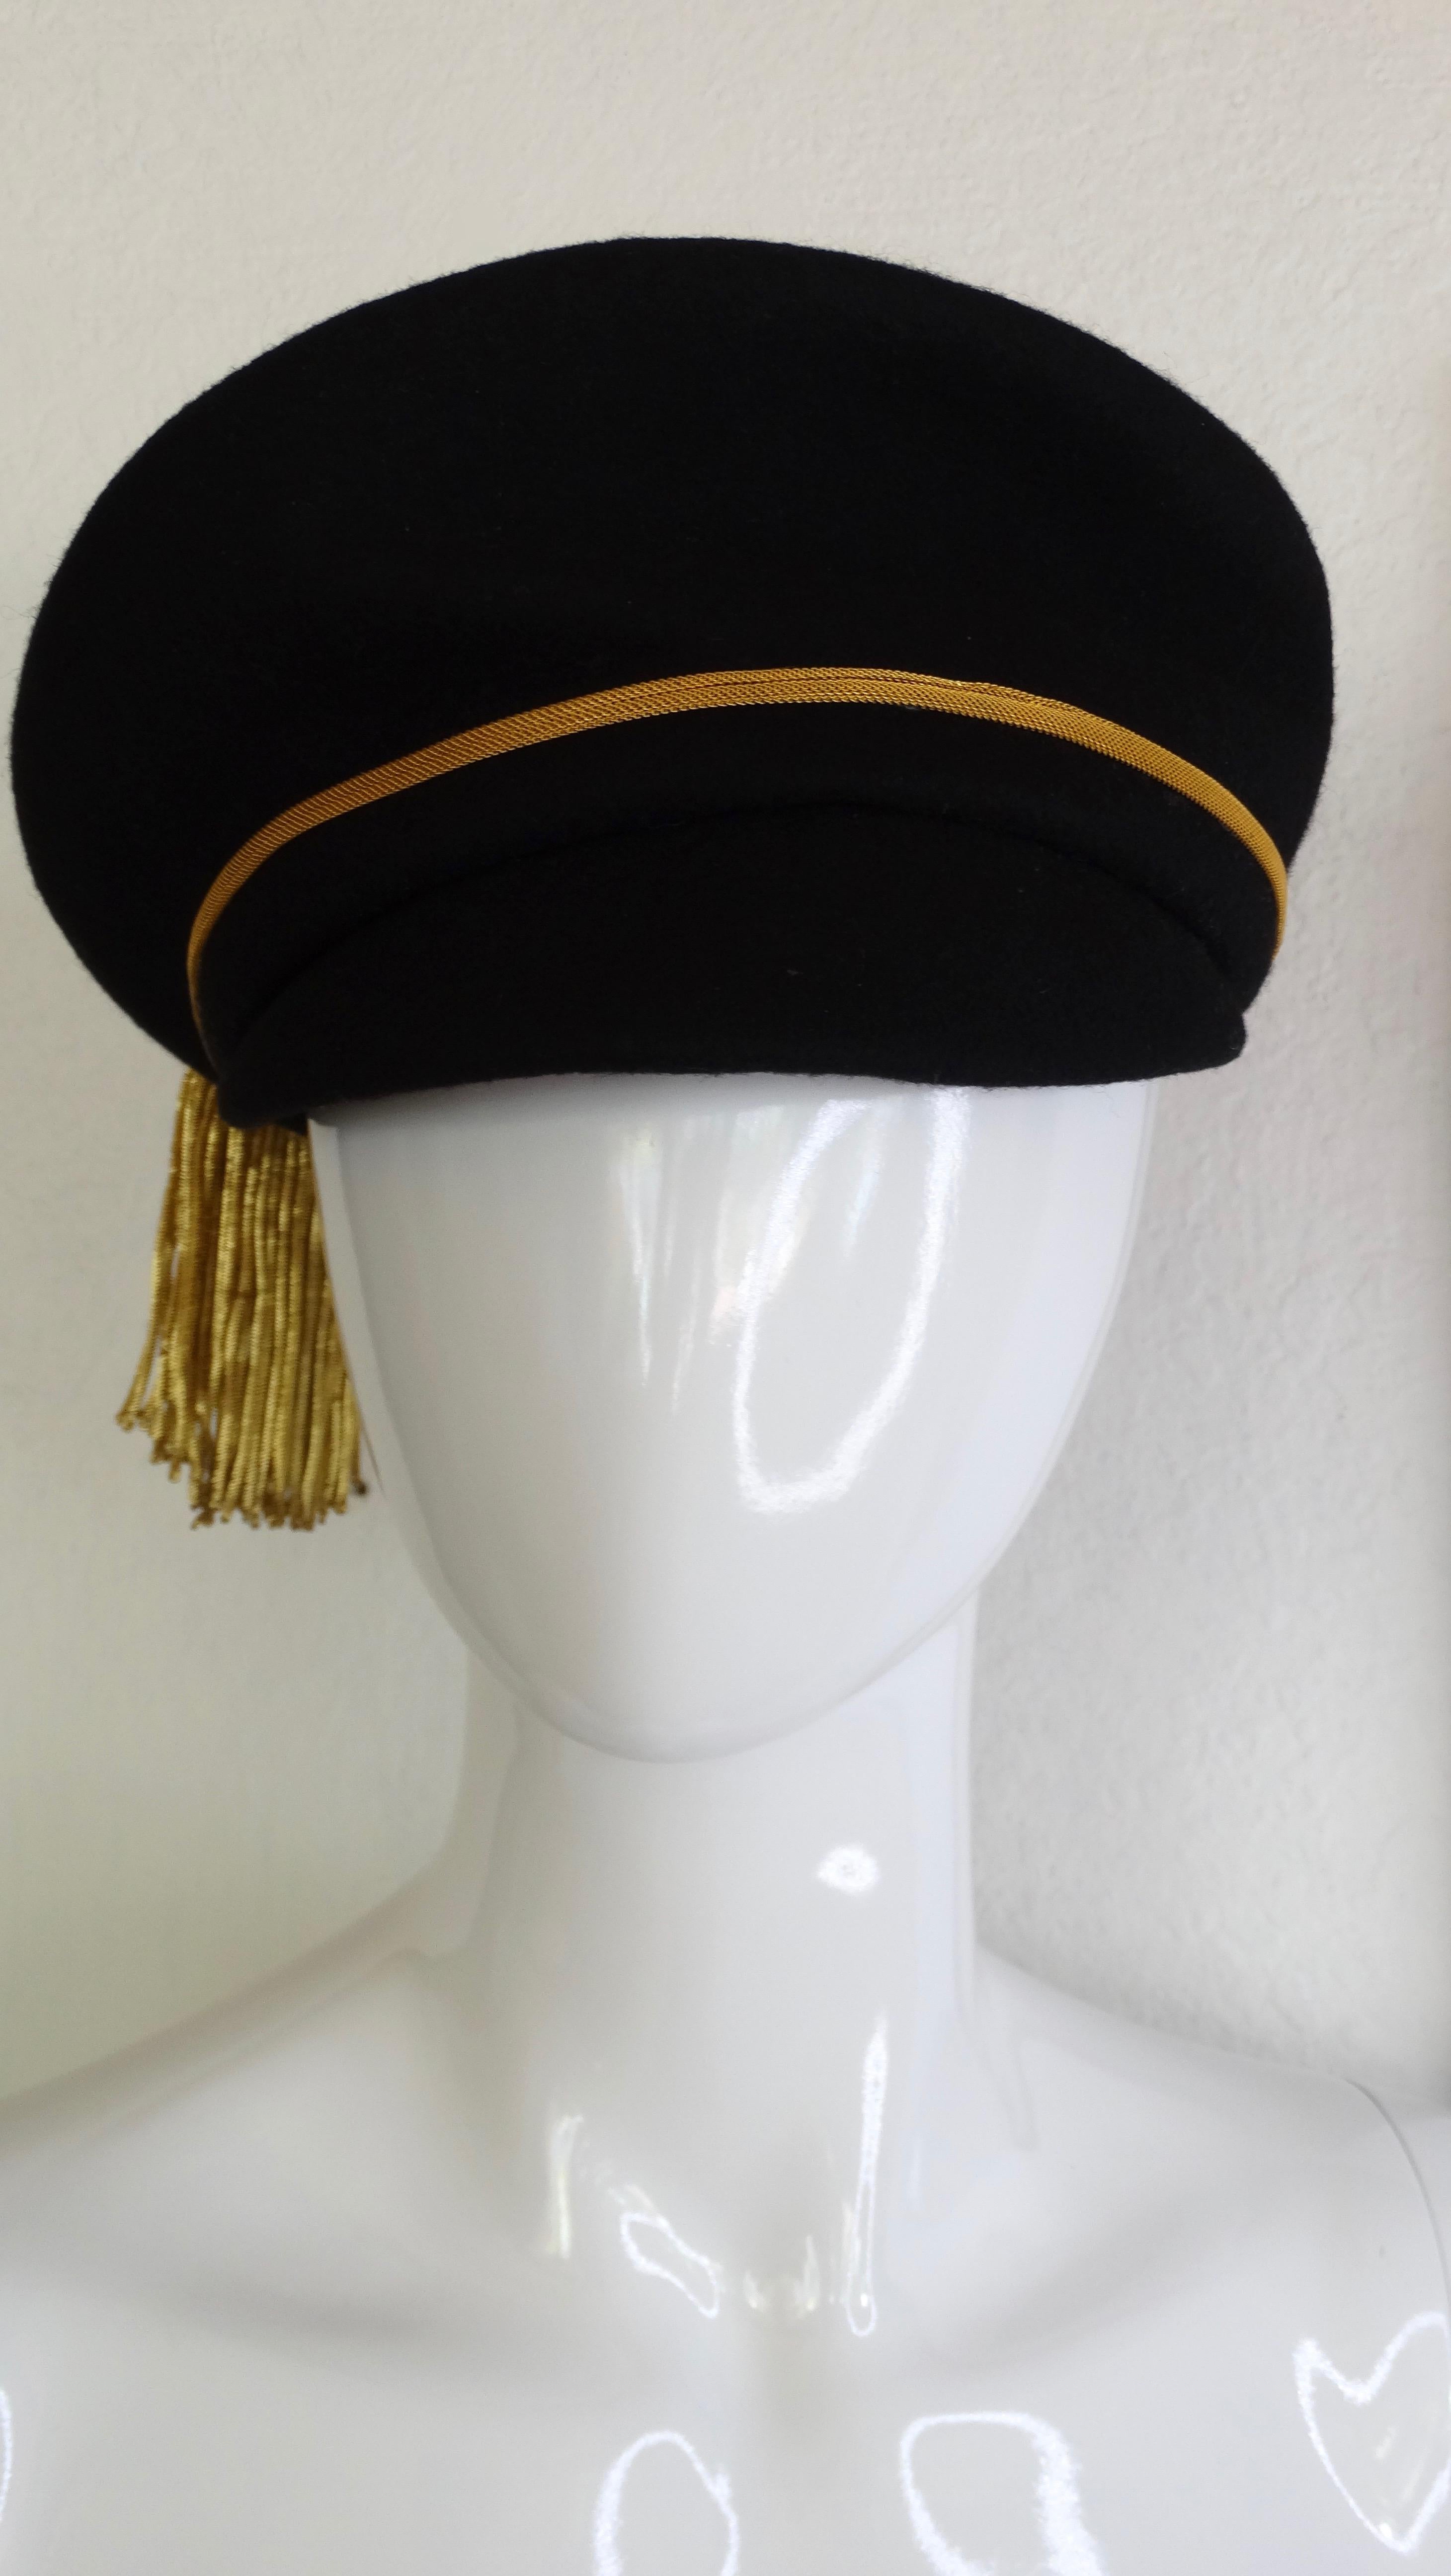 Complete your hat collection with this extremely rare Versace hat! Circa 1990s, this black felt train conductor style hat features a gold trim and large gold threaded tassel which hangs from a 24K Medusa embossed medallion framed with black